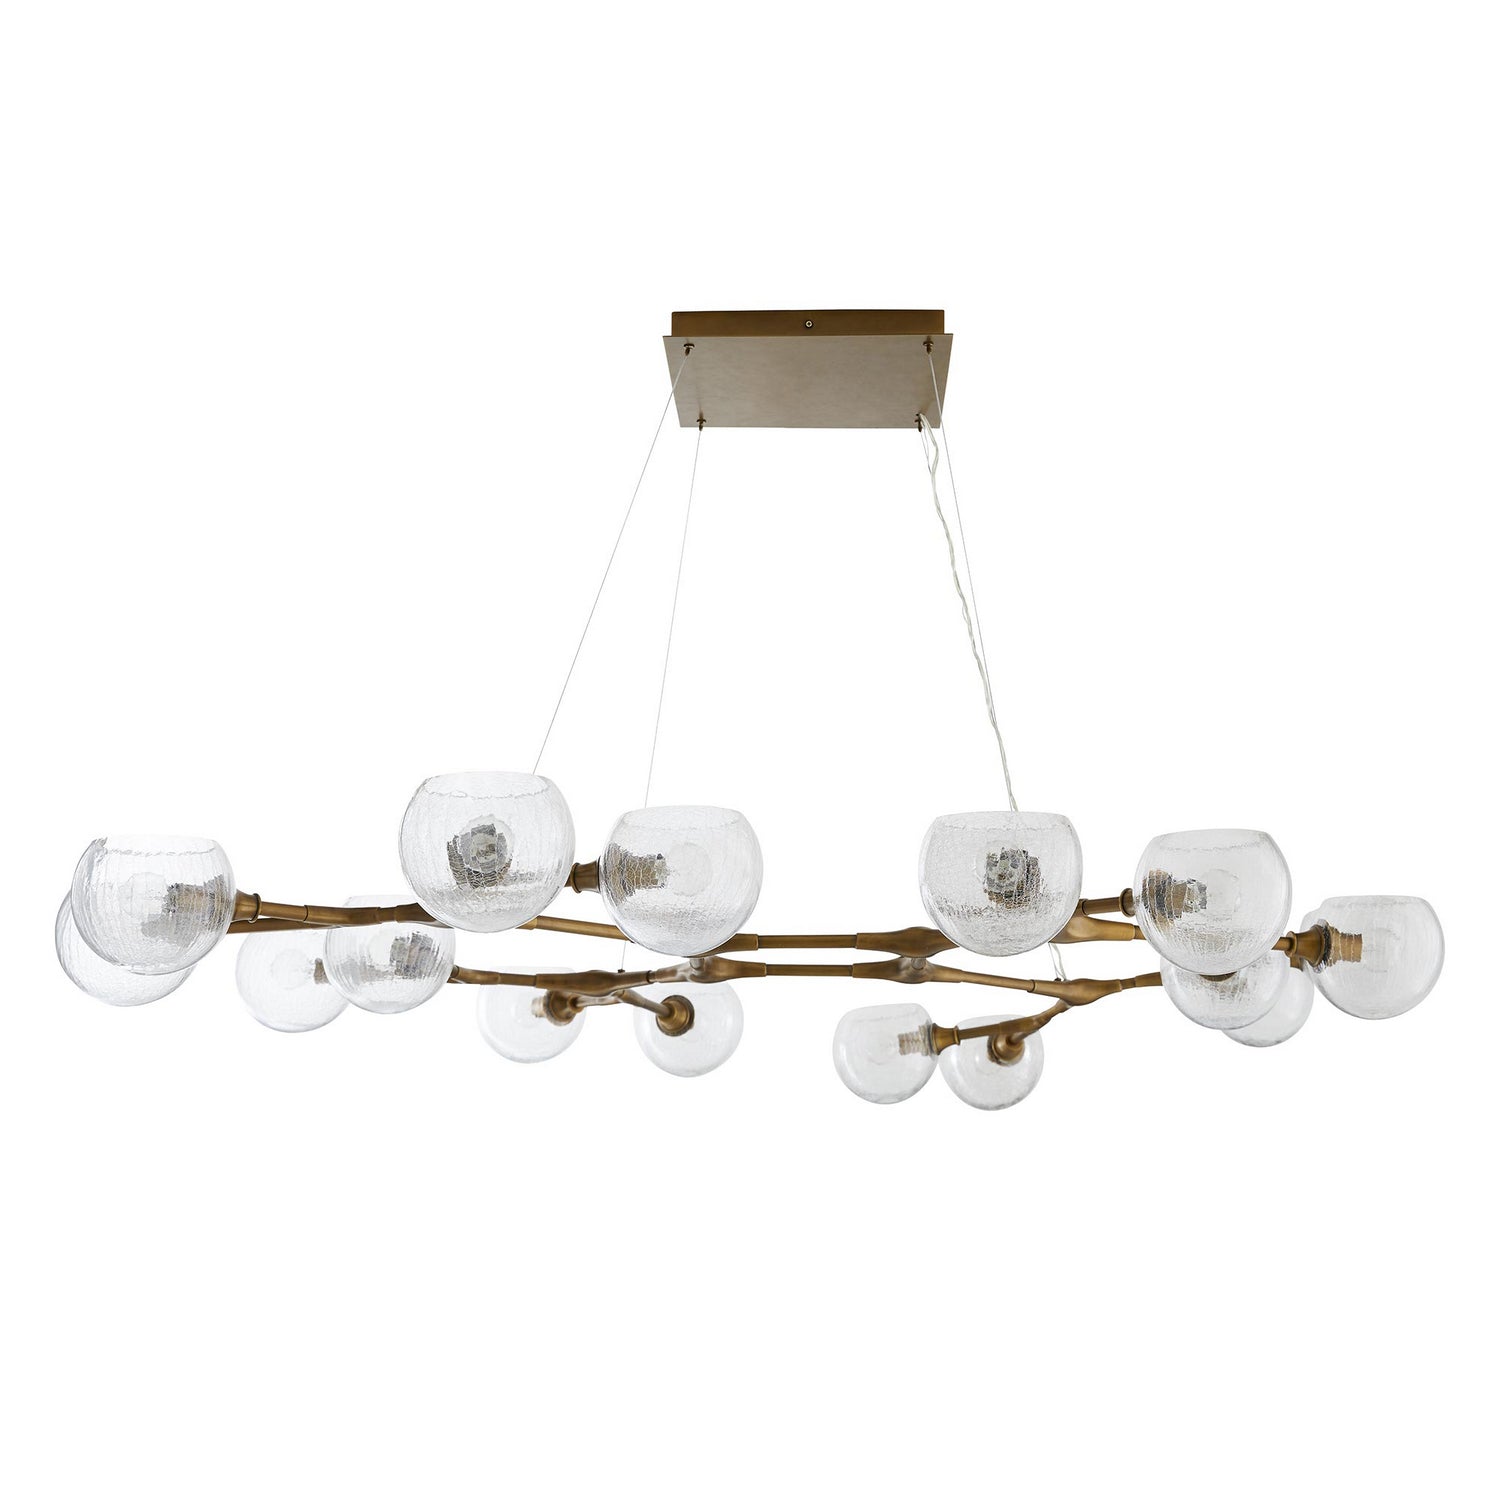 16 Light Chandelier from the Mahowald collection in Antique Brass finish